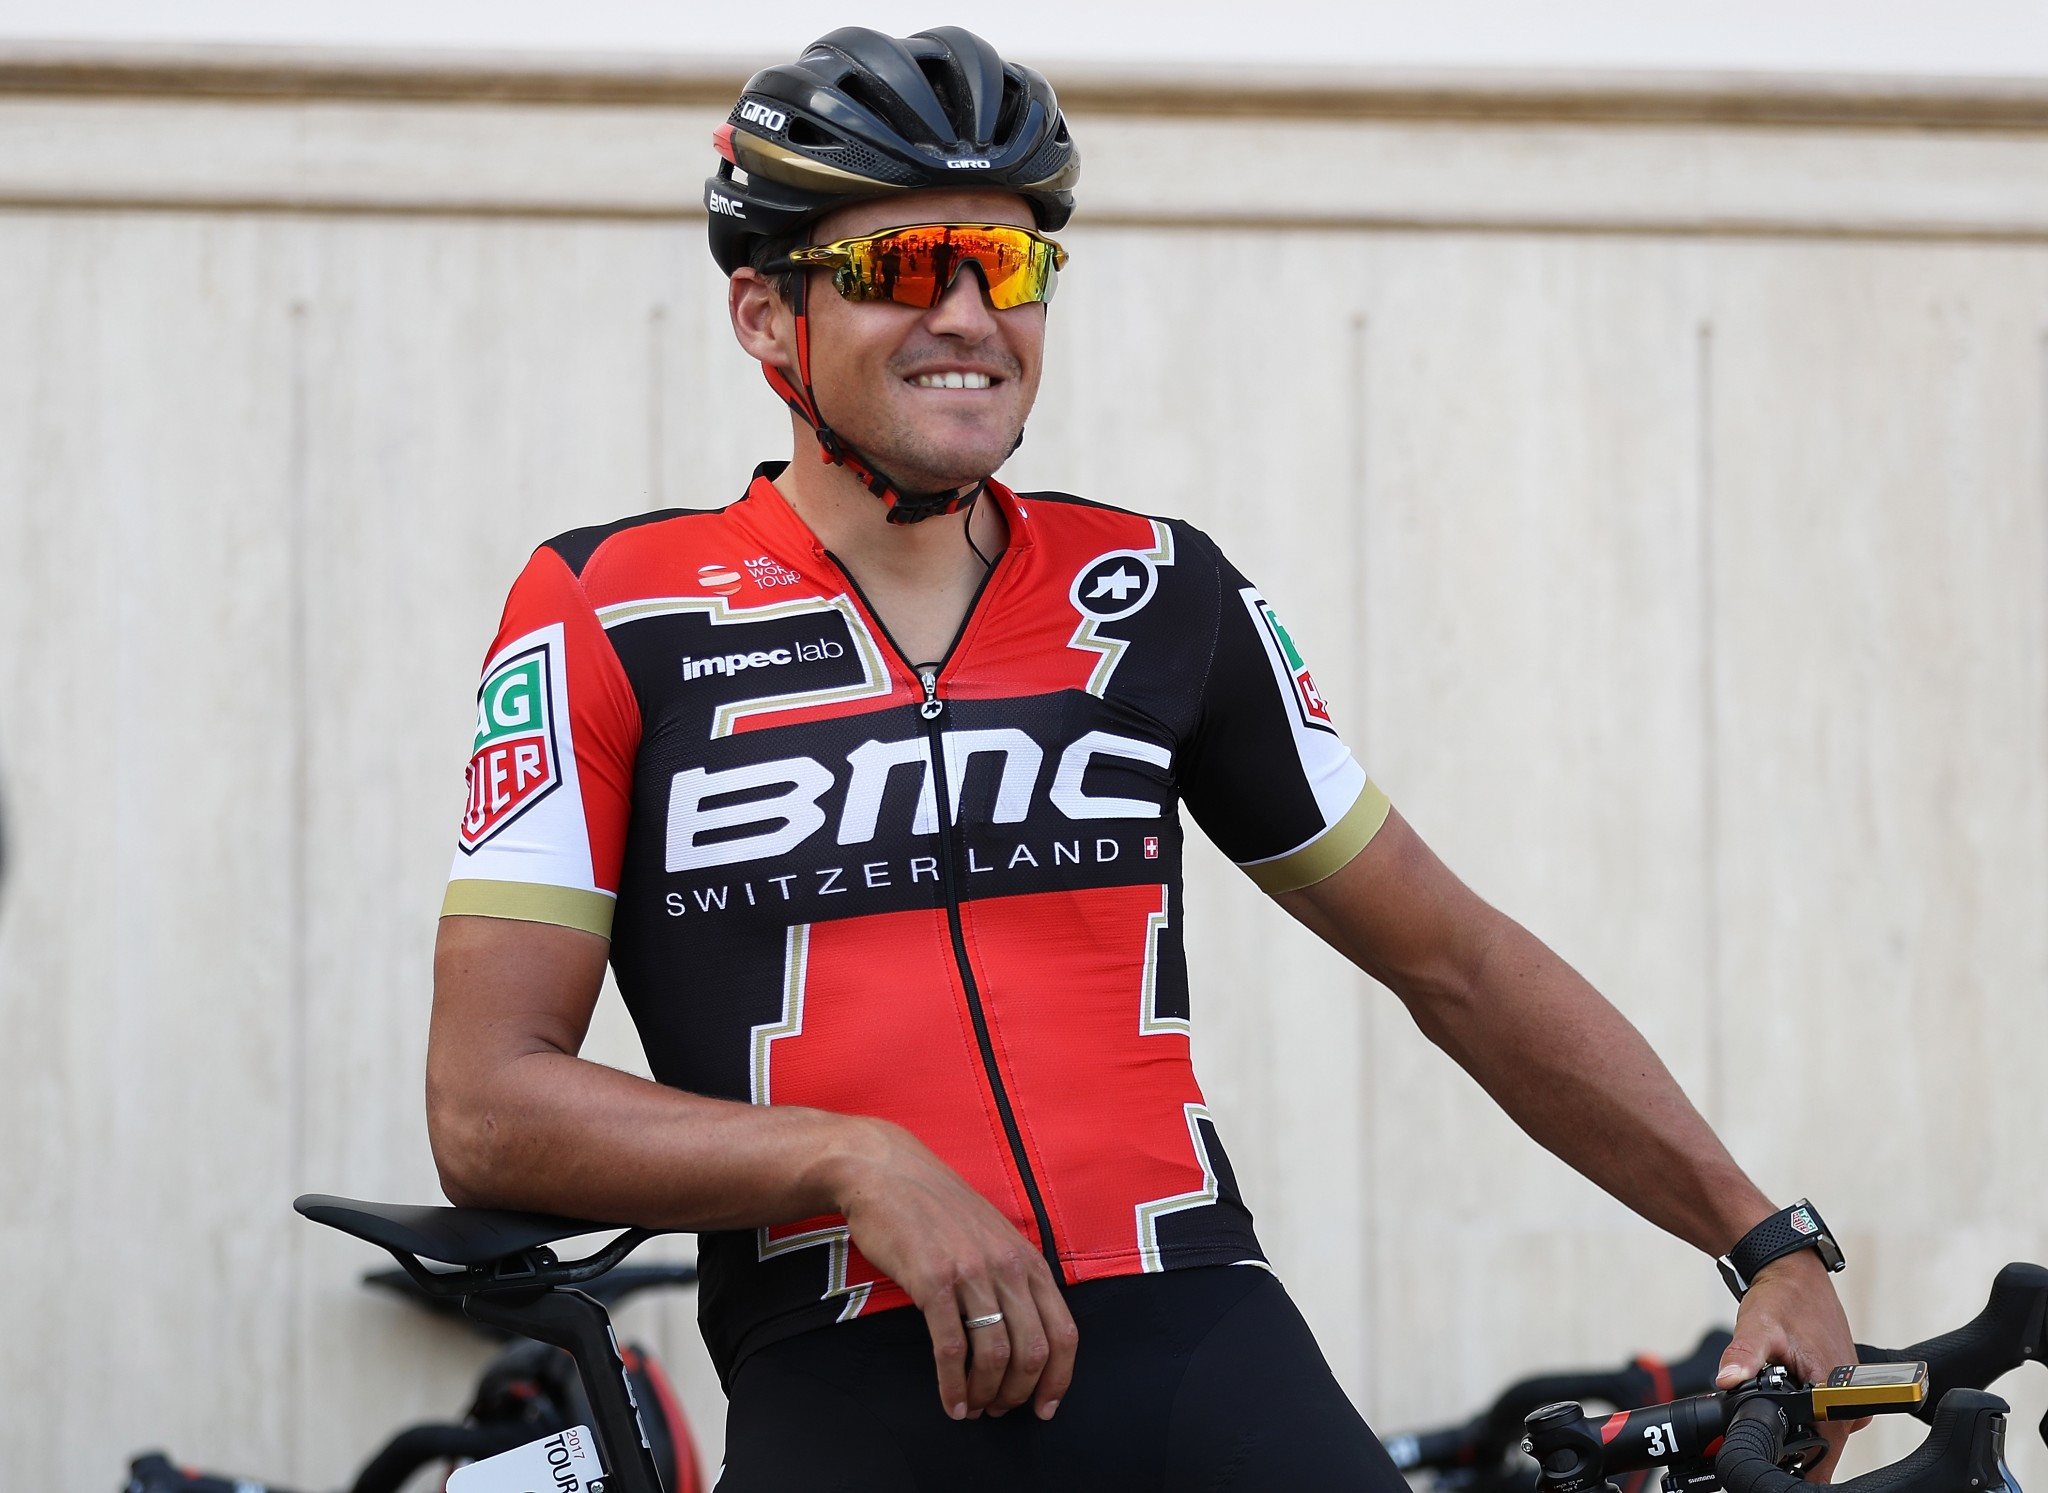 Olympic champion Greg van Avermaet finished runner-up for the second consecutive year and third time in all ©Getty Images